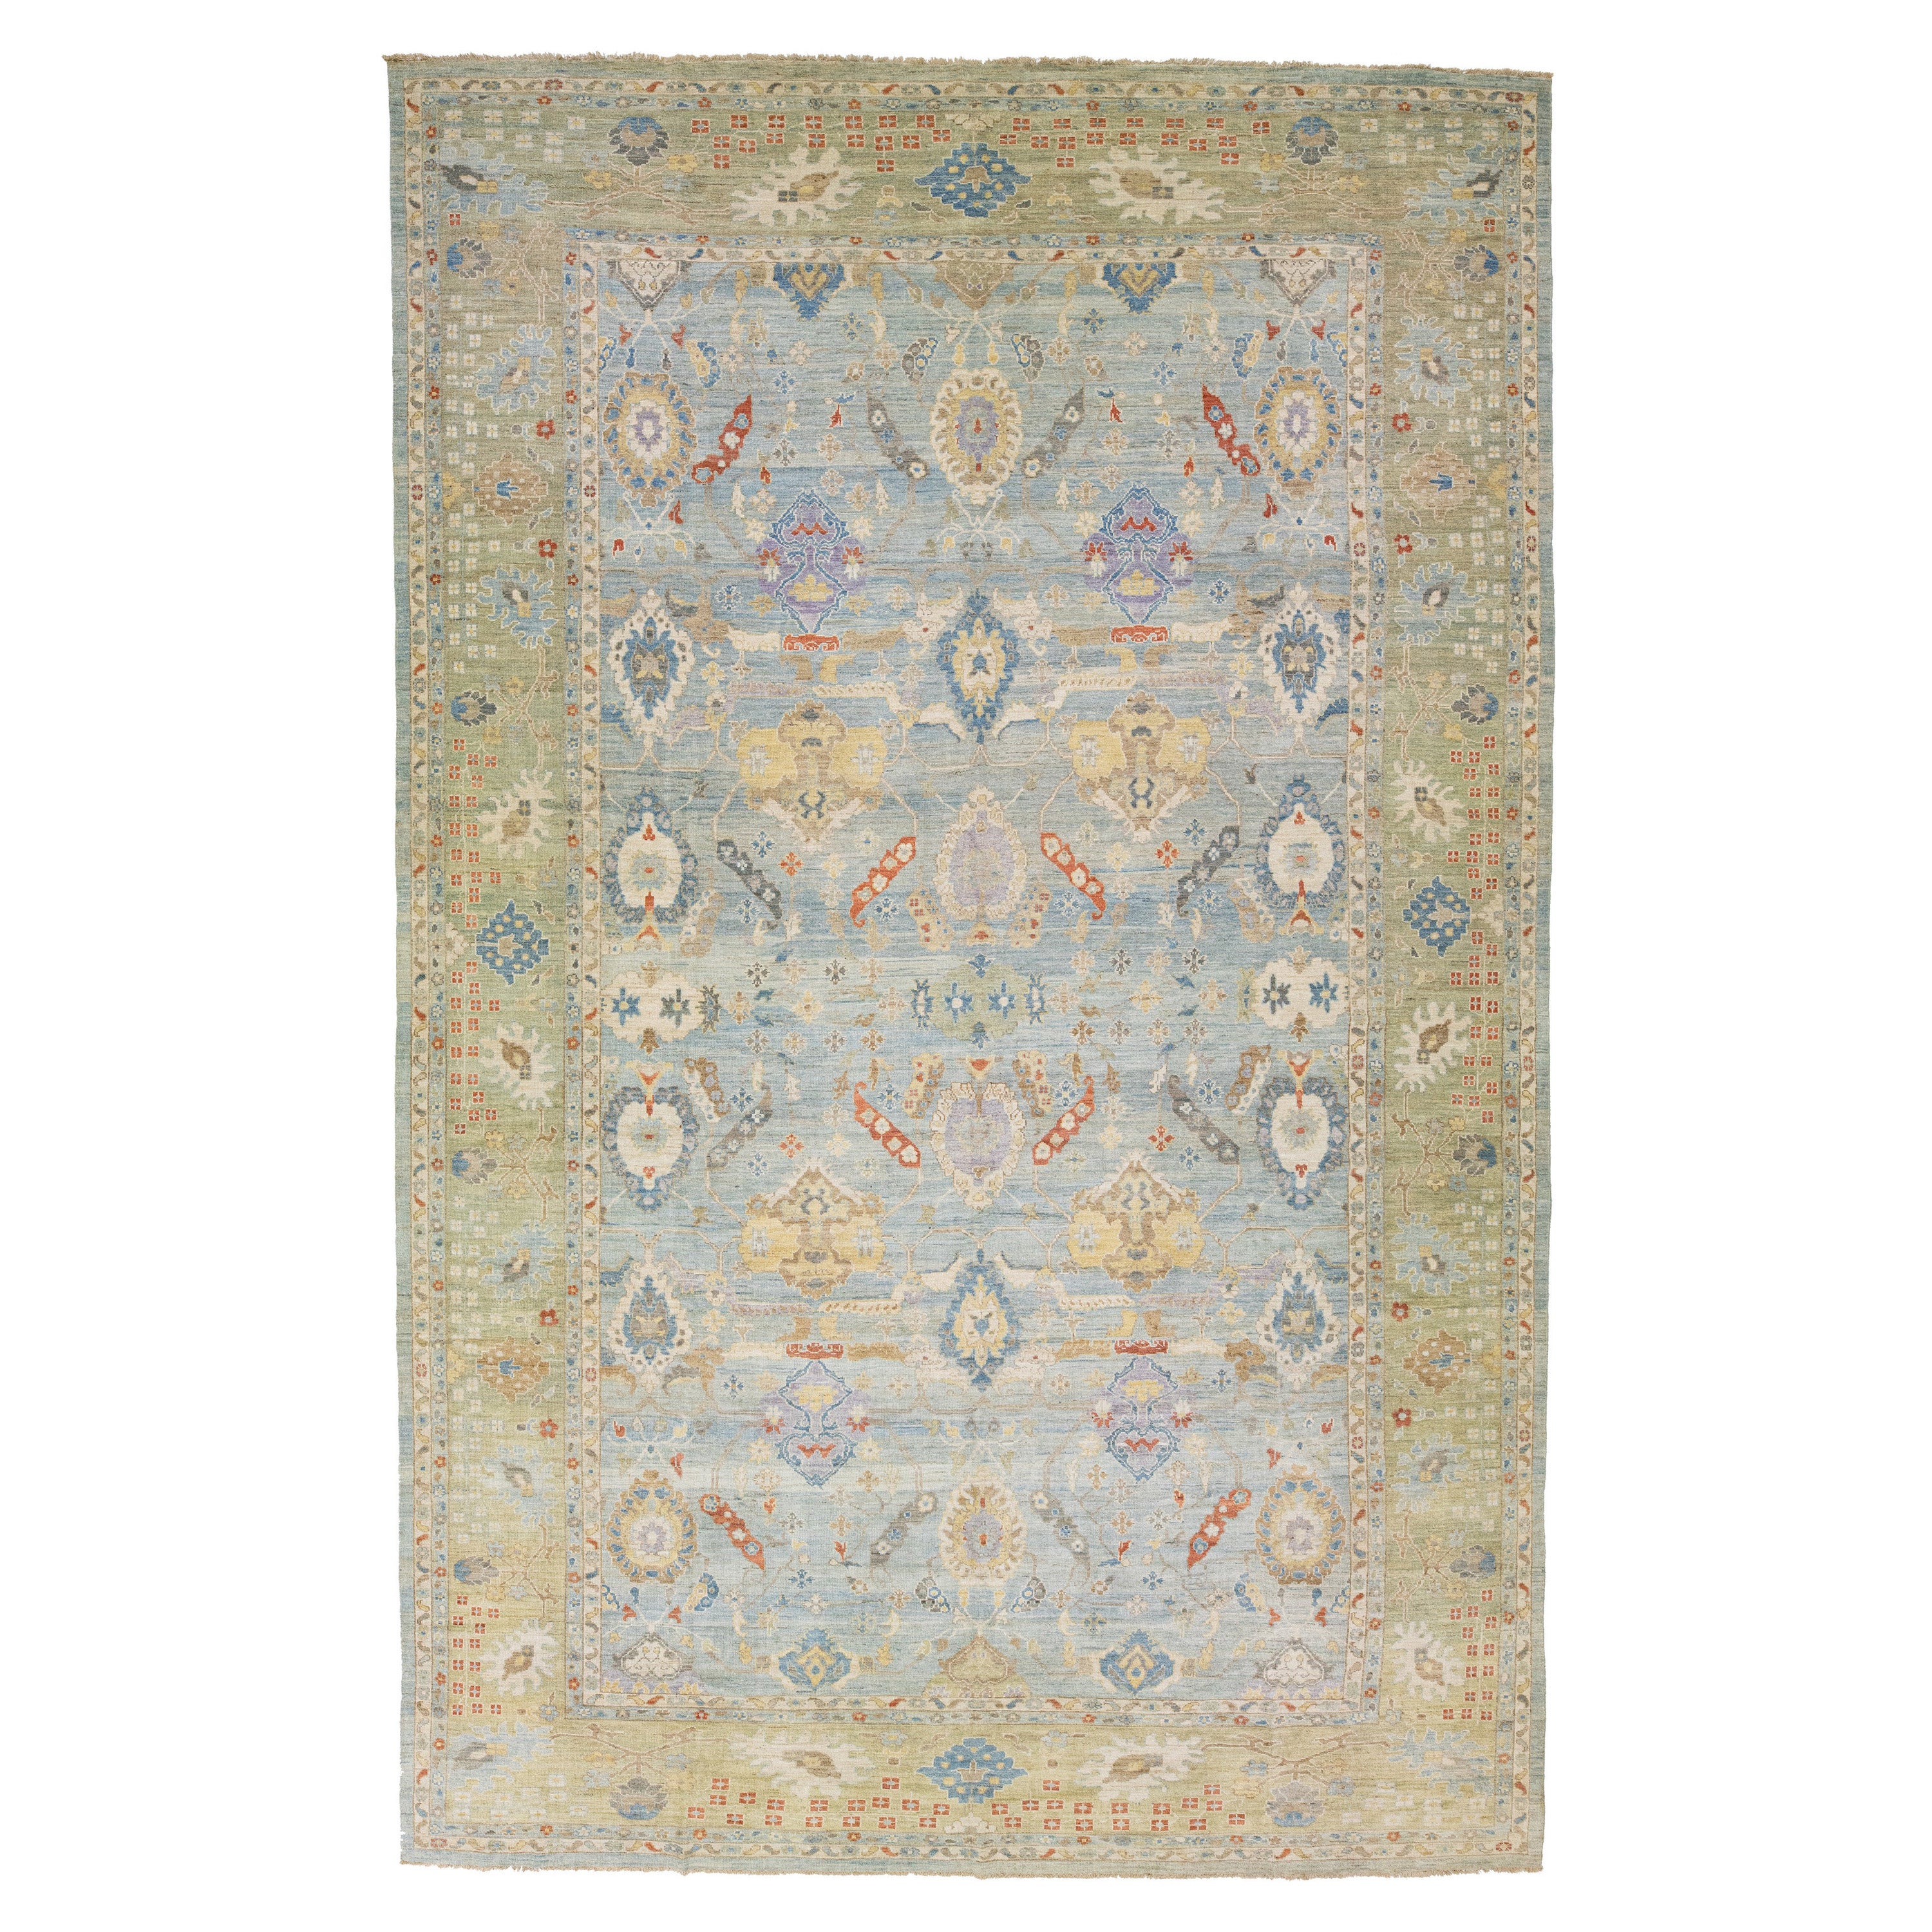 Contemporary Sultanabad Blue Handmade Floral Pattern Wool Rug